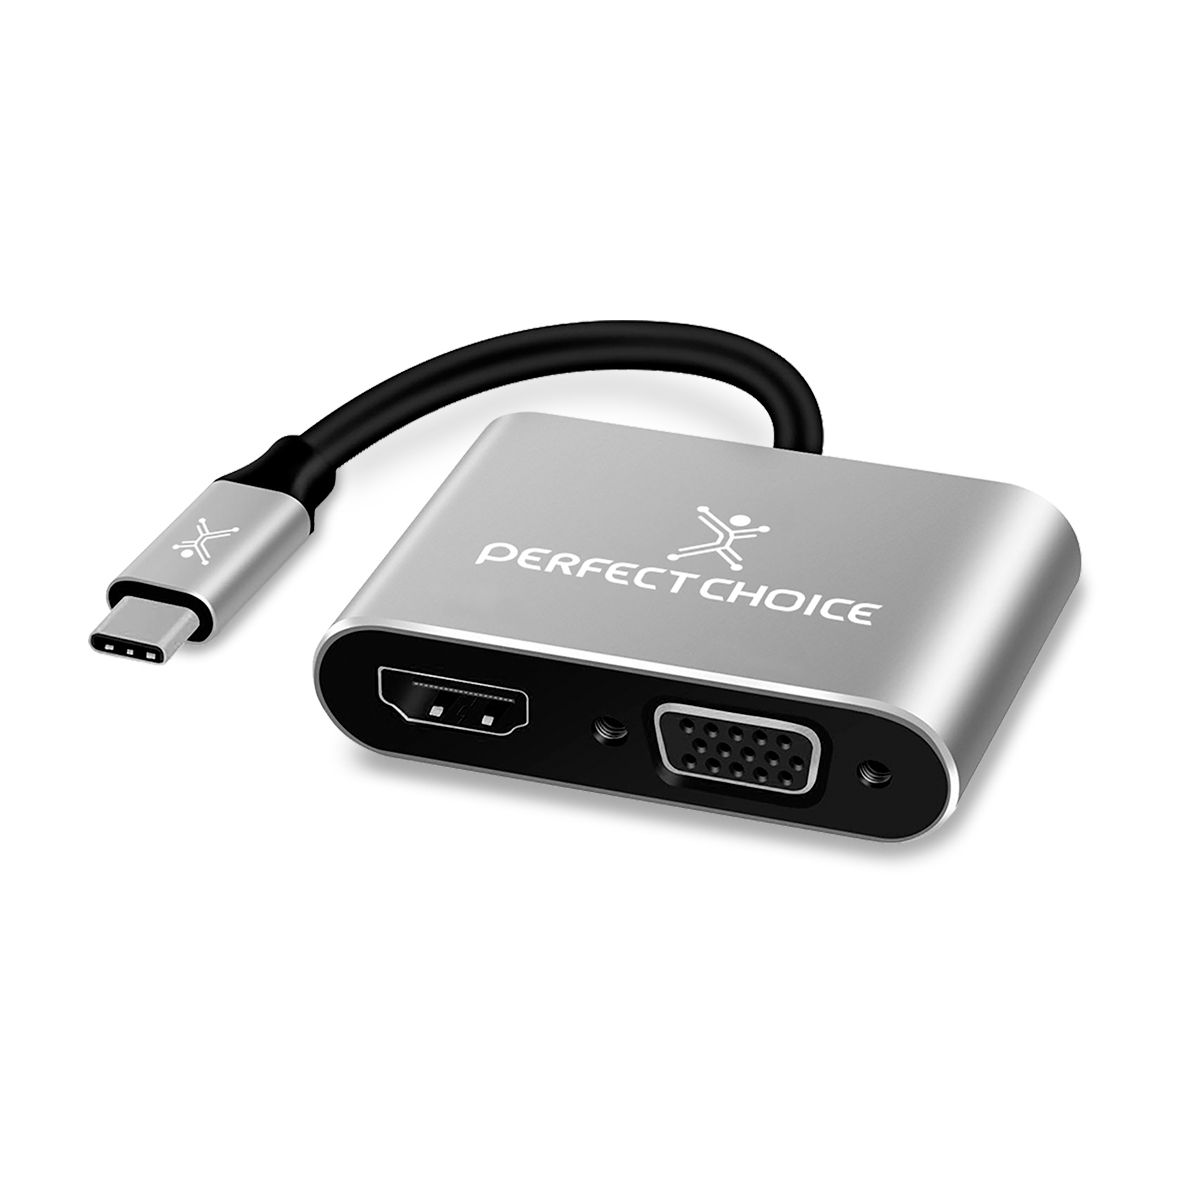 Cable USB Tipo C a HDMI y VGA Perfect Choice PC-101284 | Office Depot Mexico